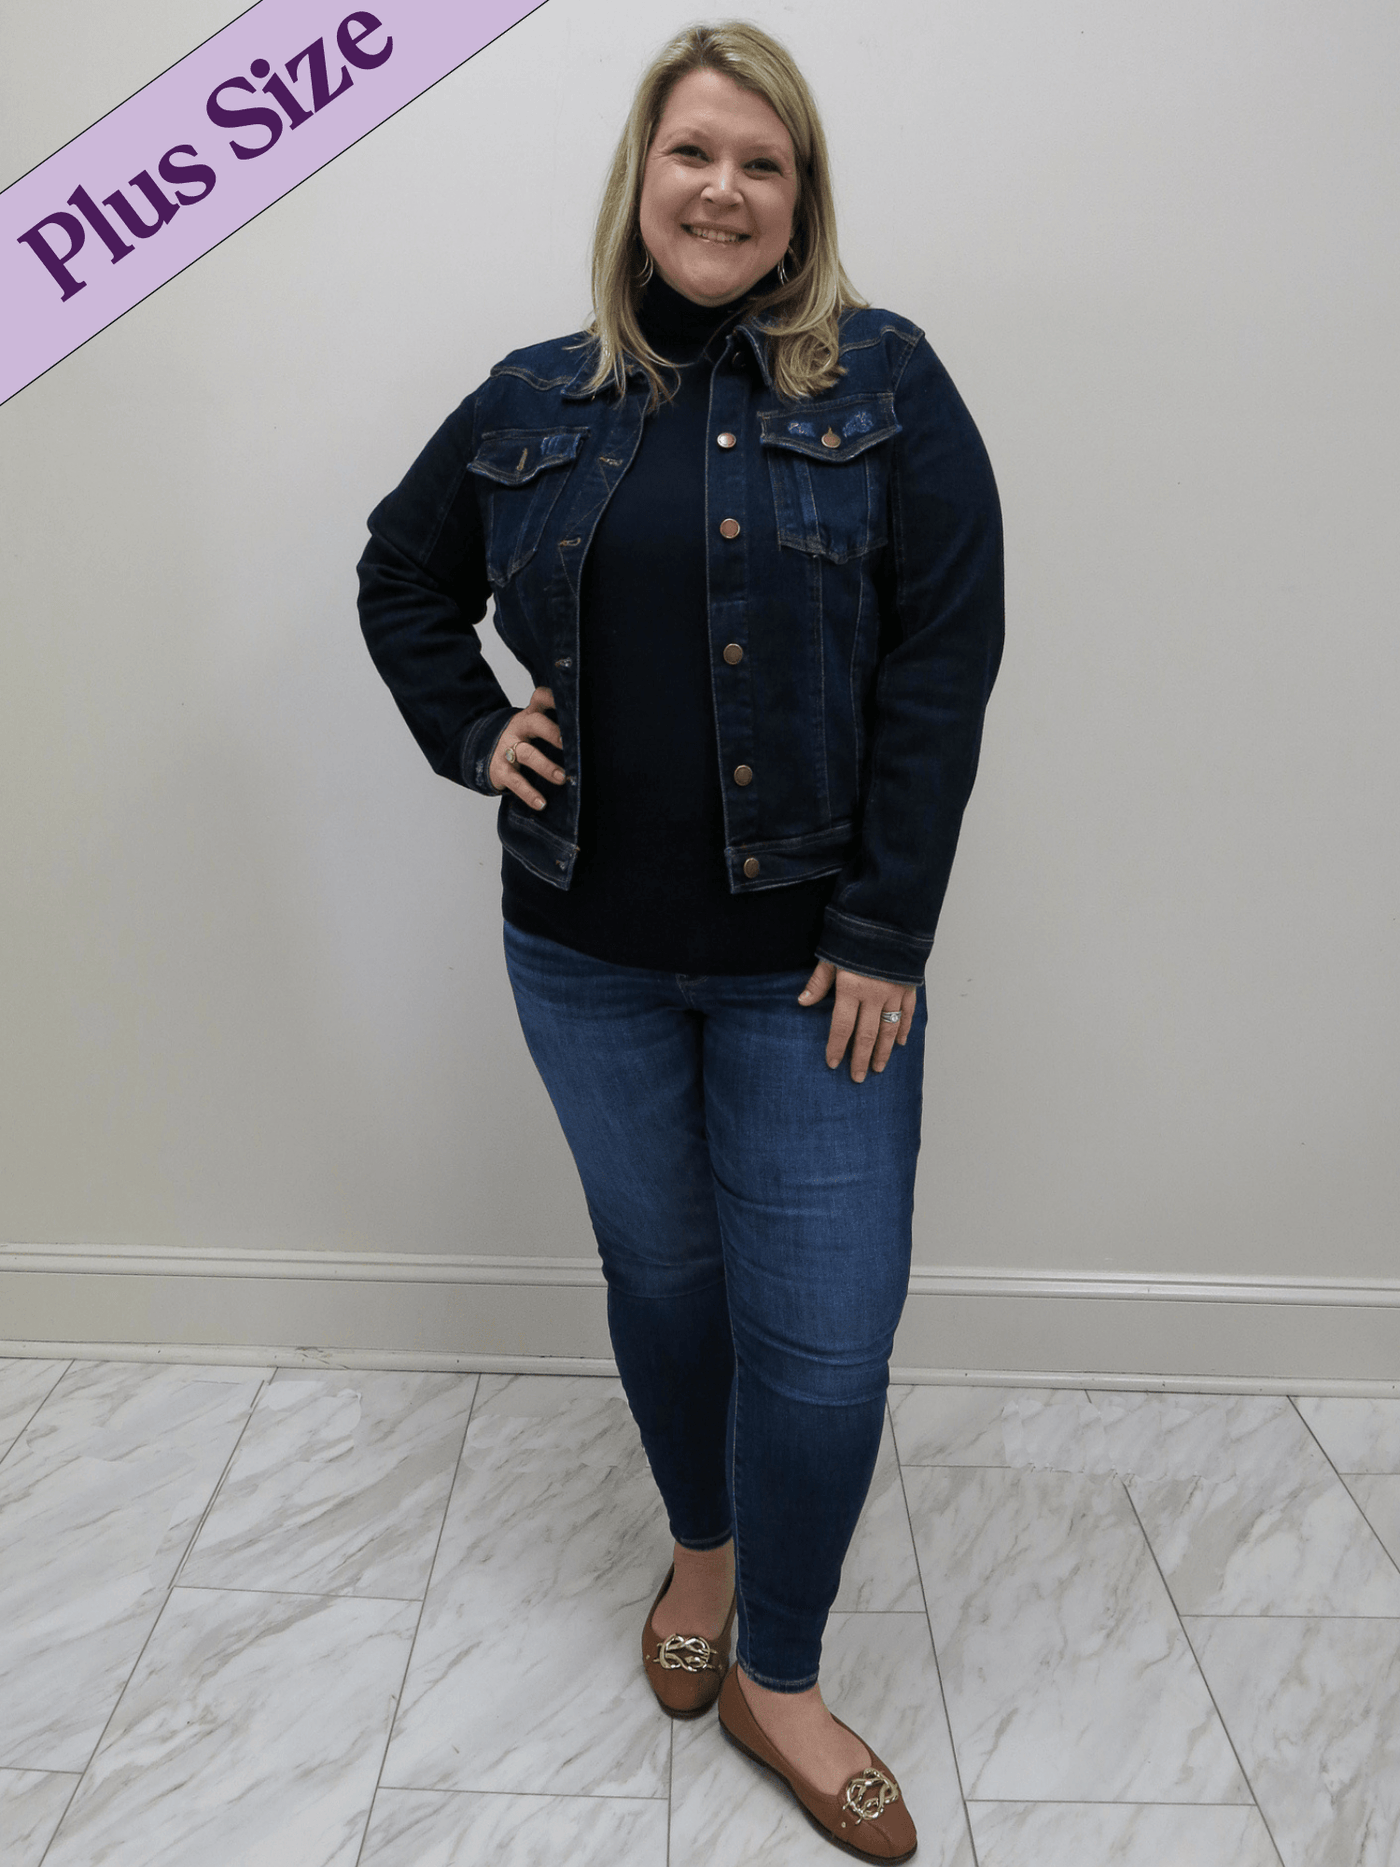 Risen plus size classic jean jacket with copper buttons with jeans and a navy turtleneck.